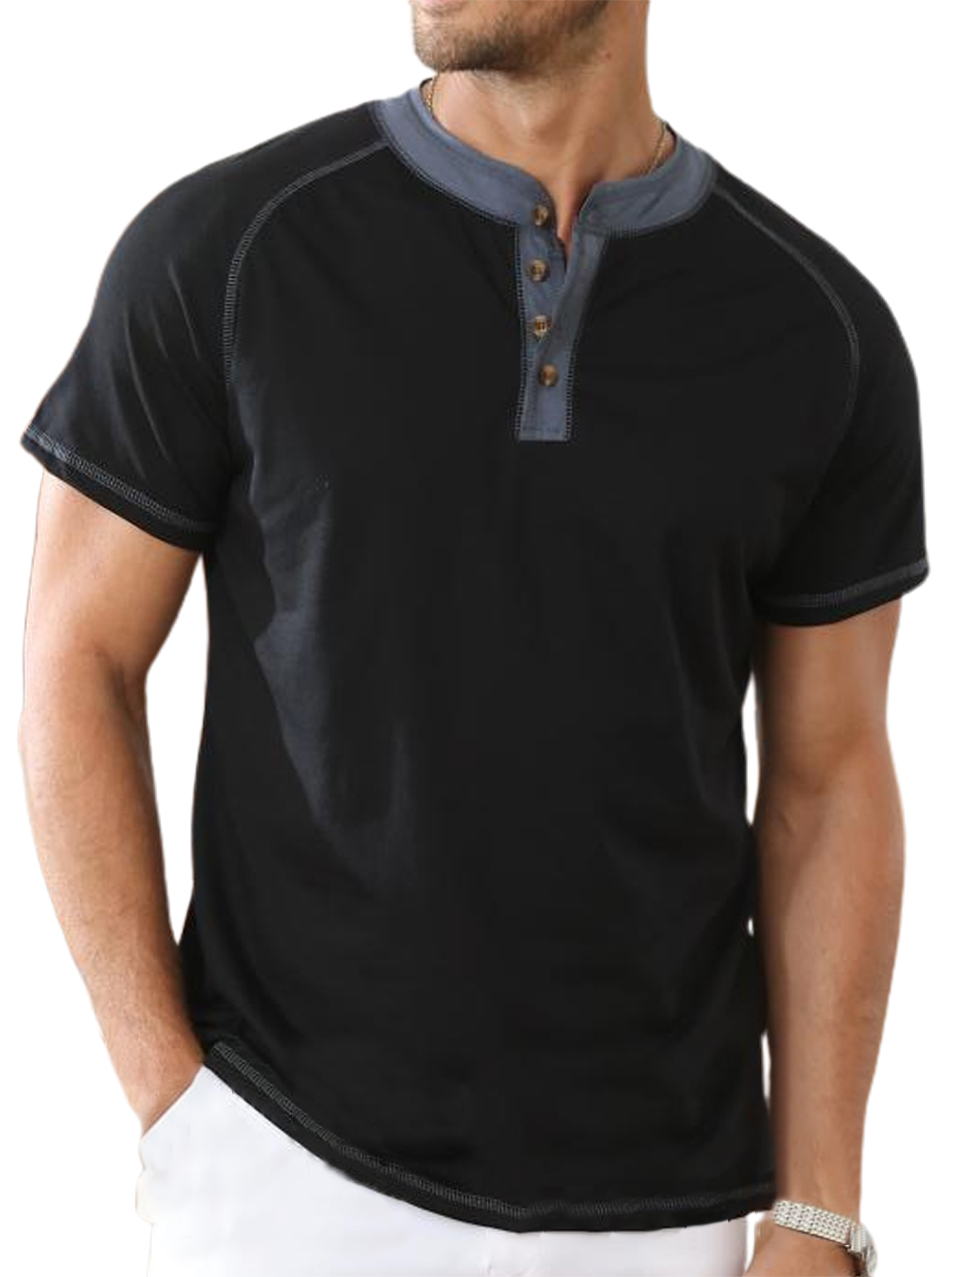 Men's Cotton Stretch Casual Everyday Henley Top